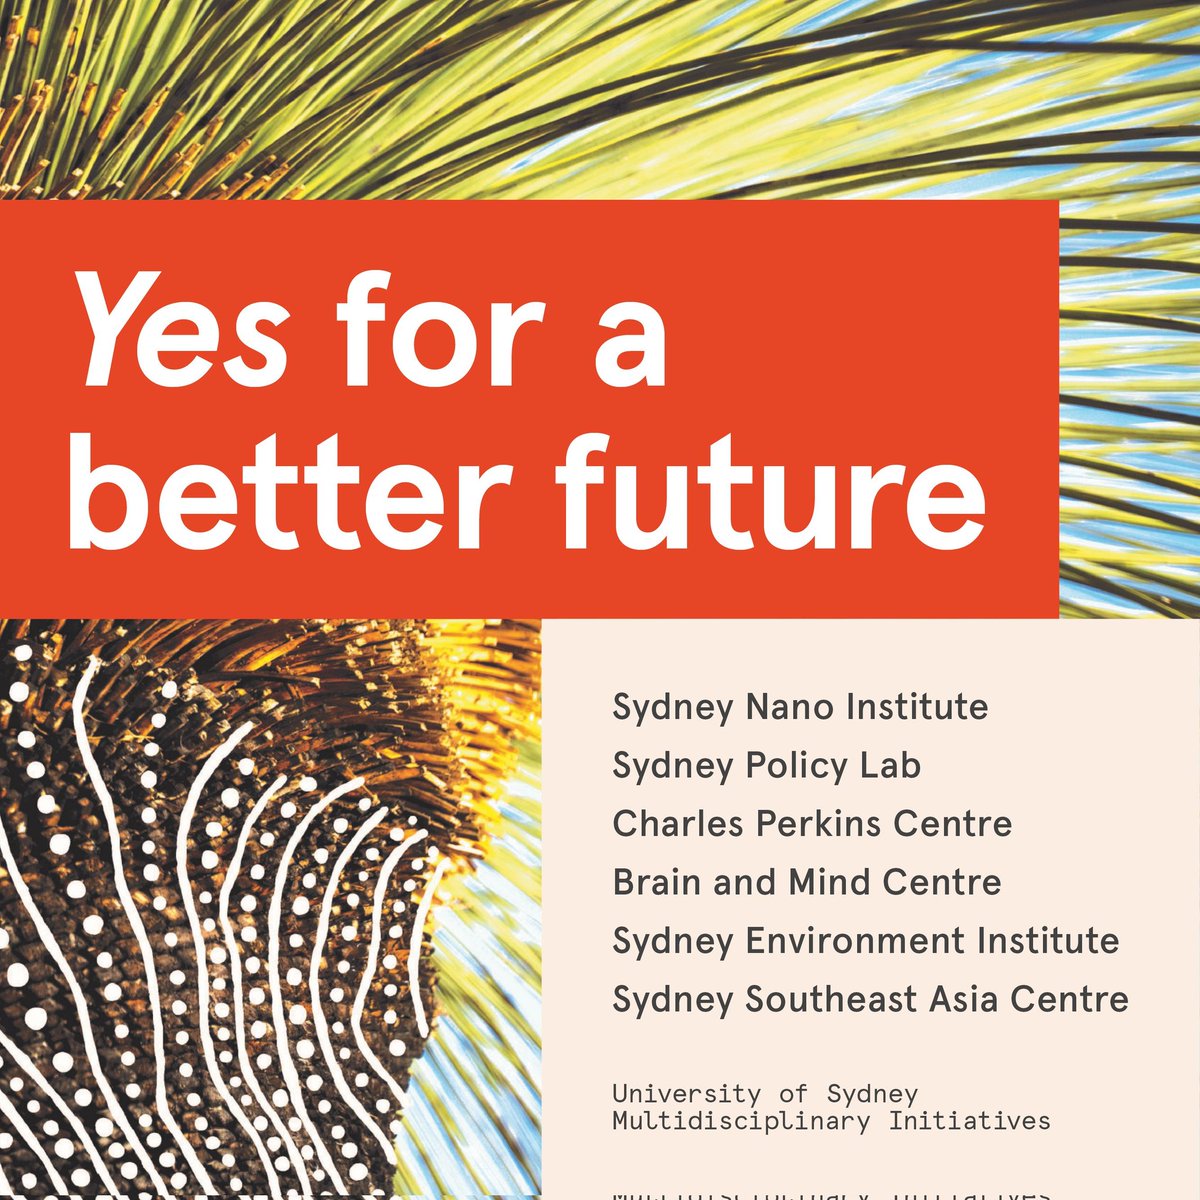 Our @SydneyNano joins university multidisciplinary initiatives for supporting the #VoiceToParliament.